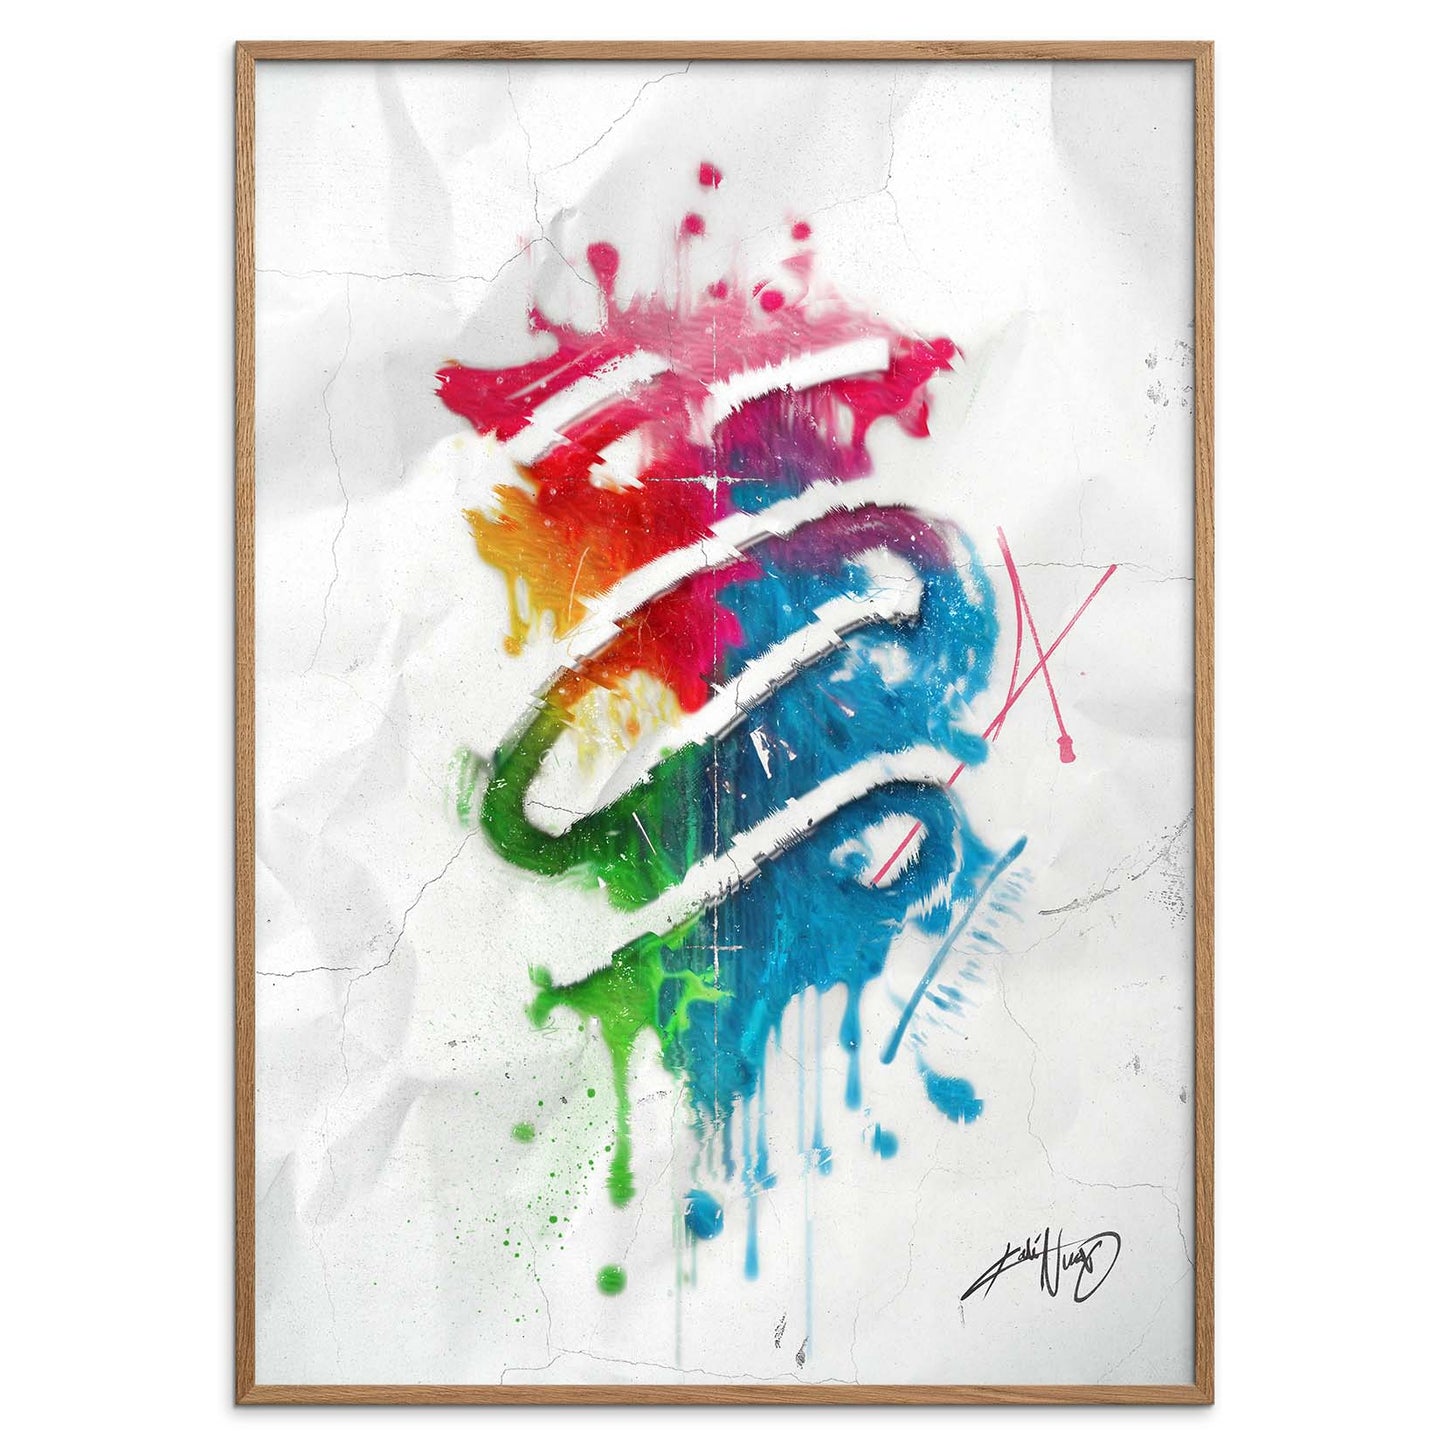 colorful abstract art poster in a natural colored wood frame on a white background